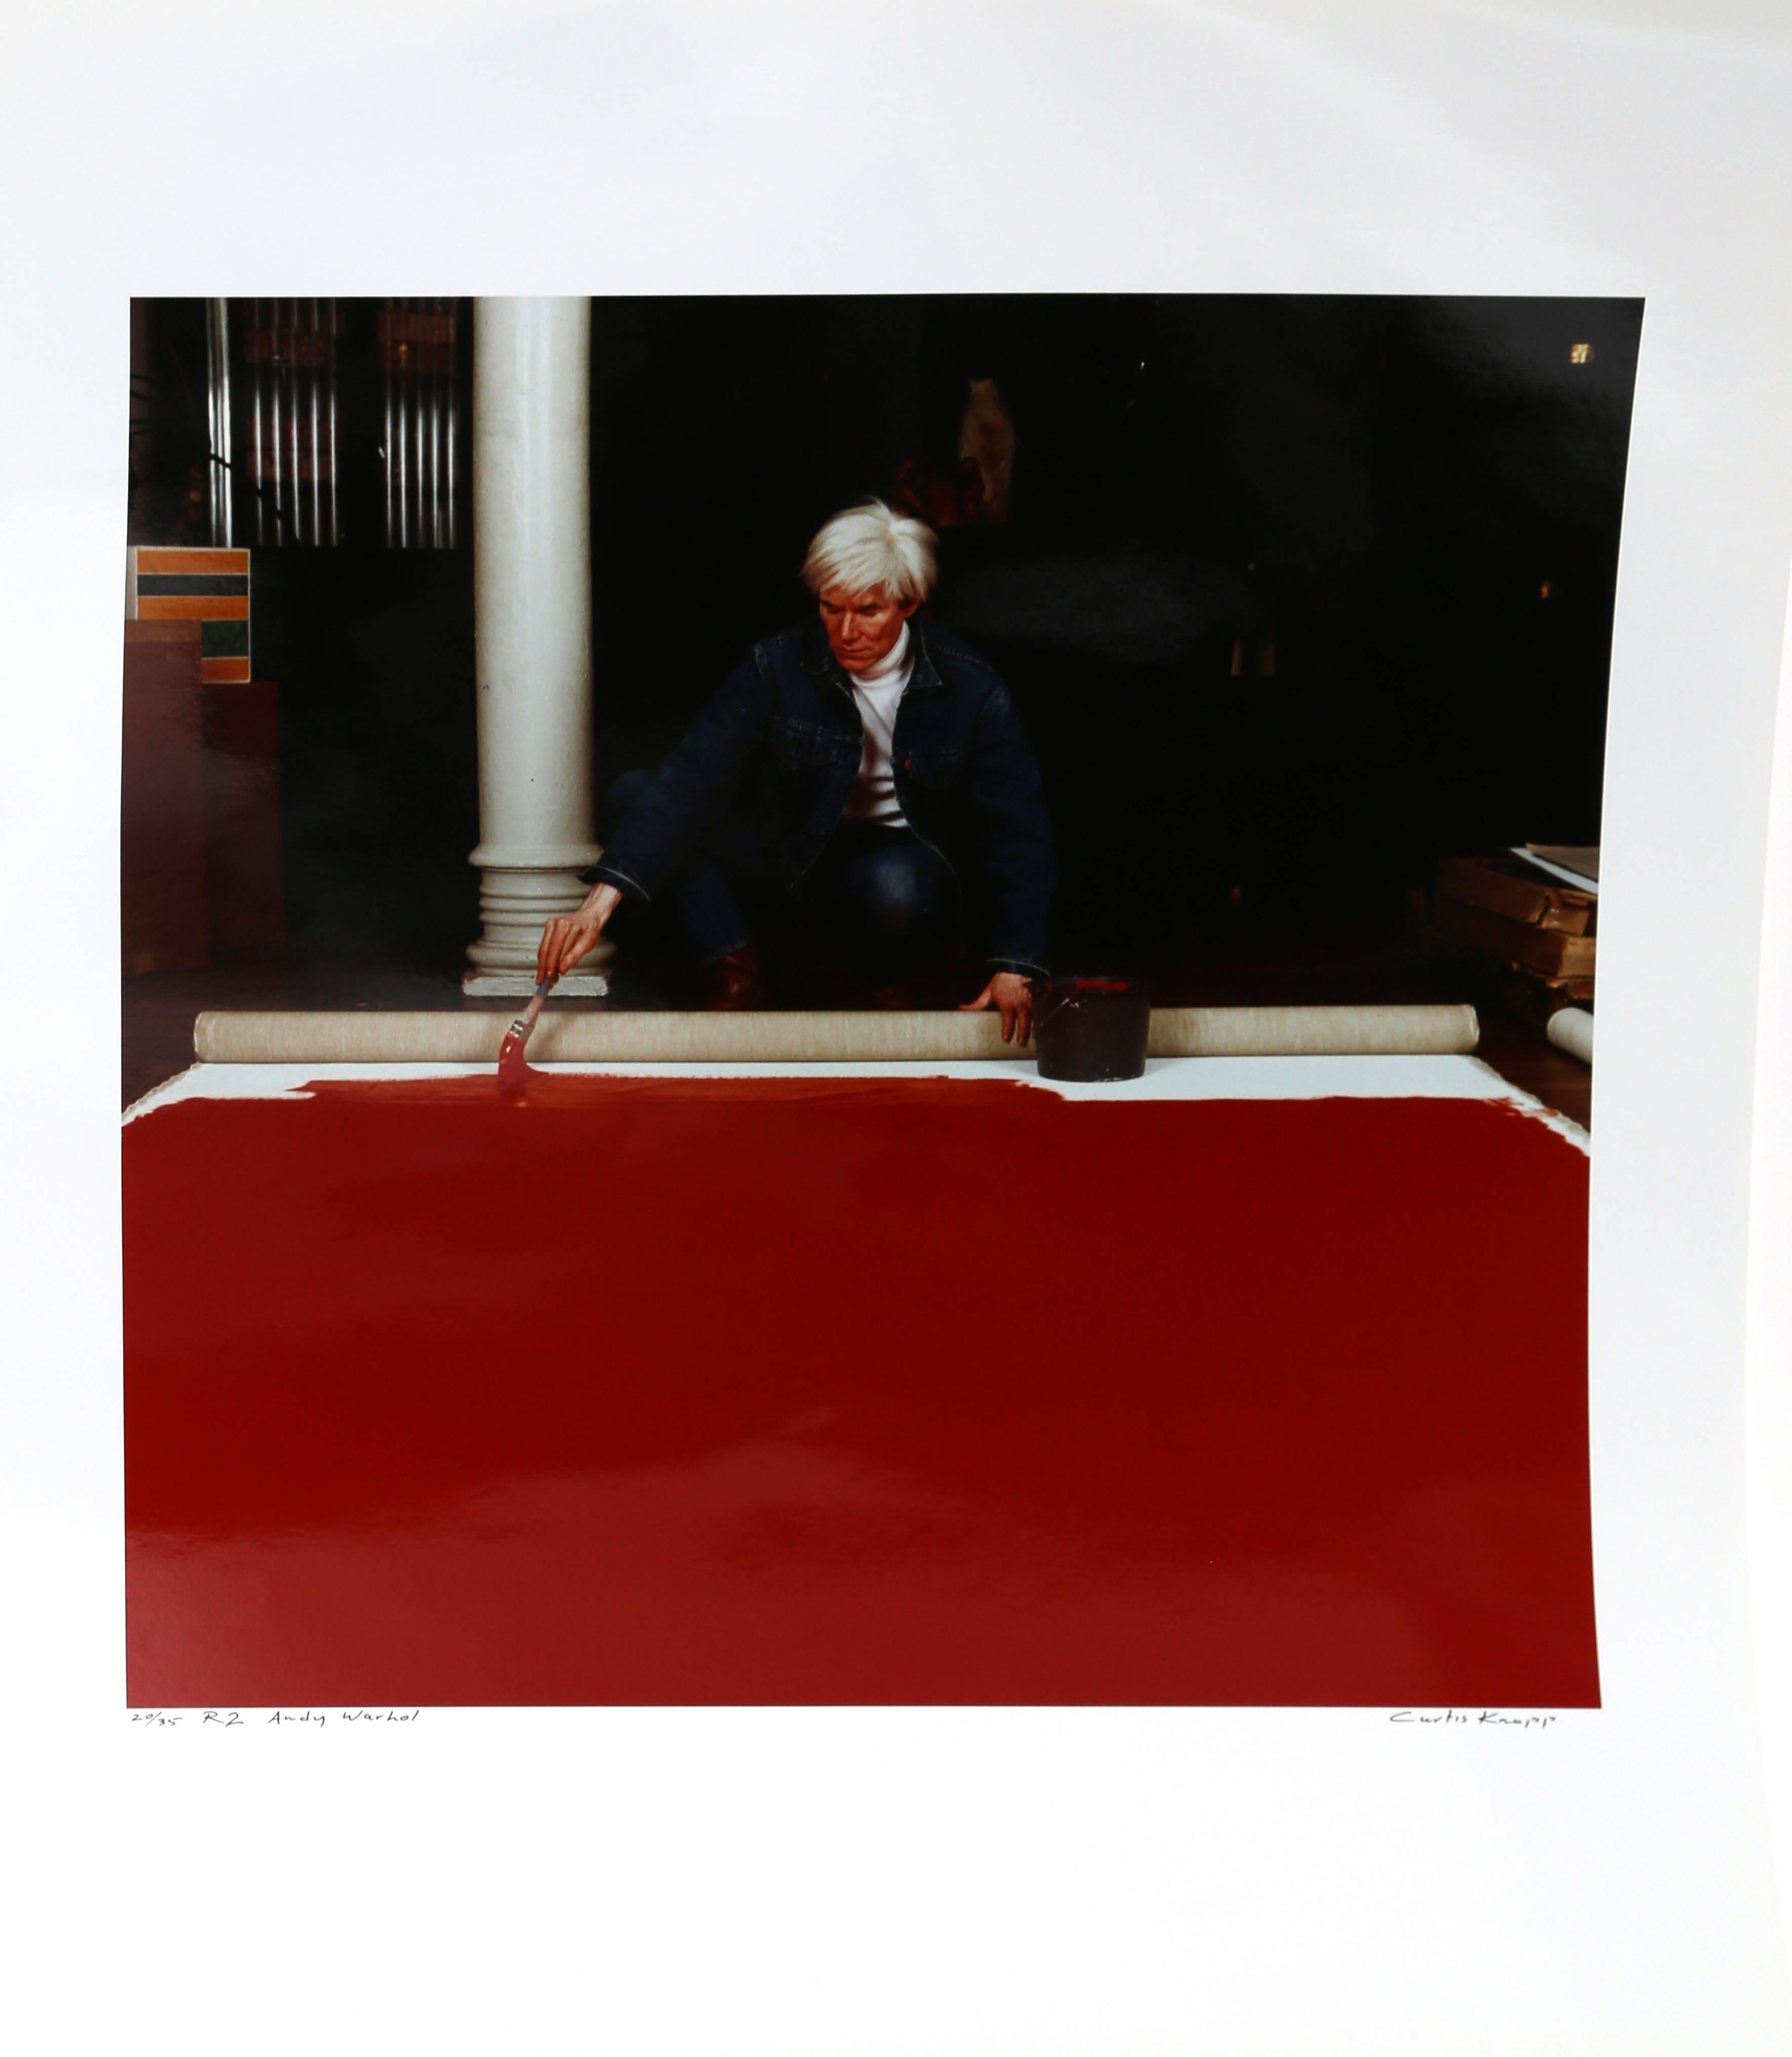 Artist: Curtis Knapp, American
Title: Andy Warhol Red Series II
Year: 1983 (printed 2004)
Medium: Color Photograph, signed and numbered
Edition: 35
Image Size: 16.5 x 16.5 inches
Size: 24 in. x 20 in. (60.96 cm x 50.8 cm)